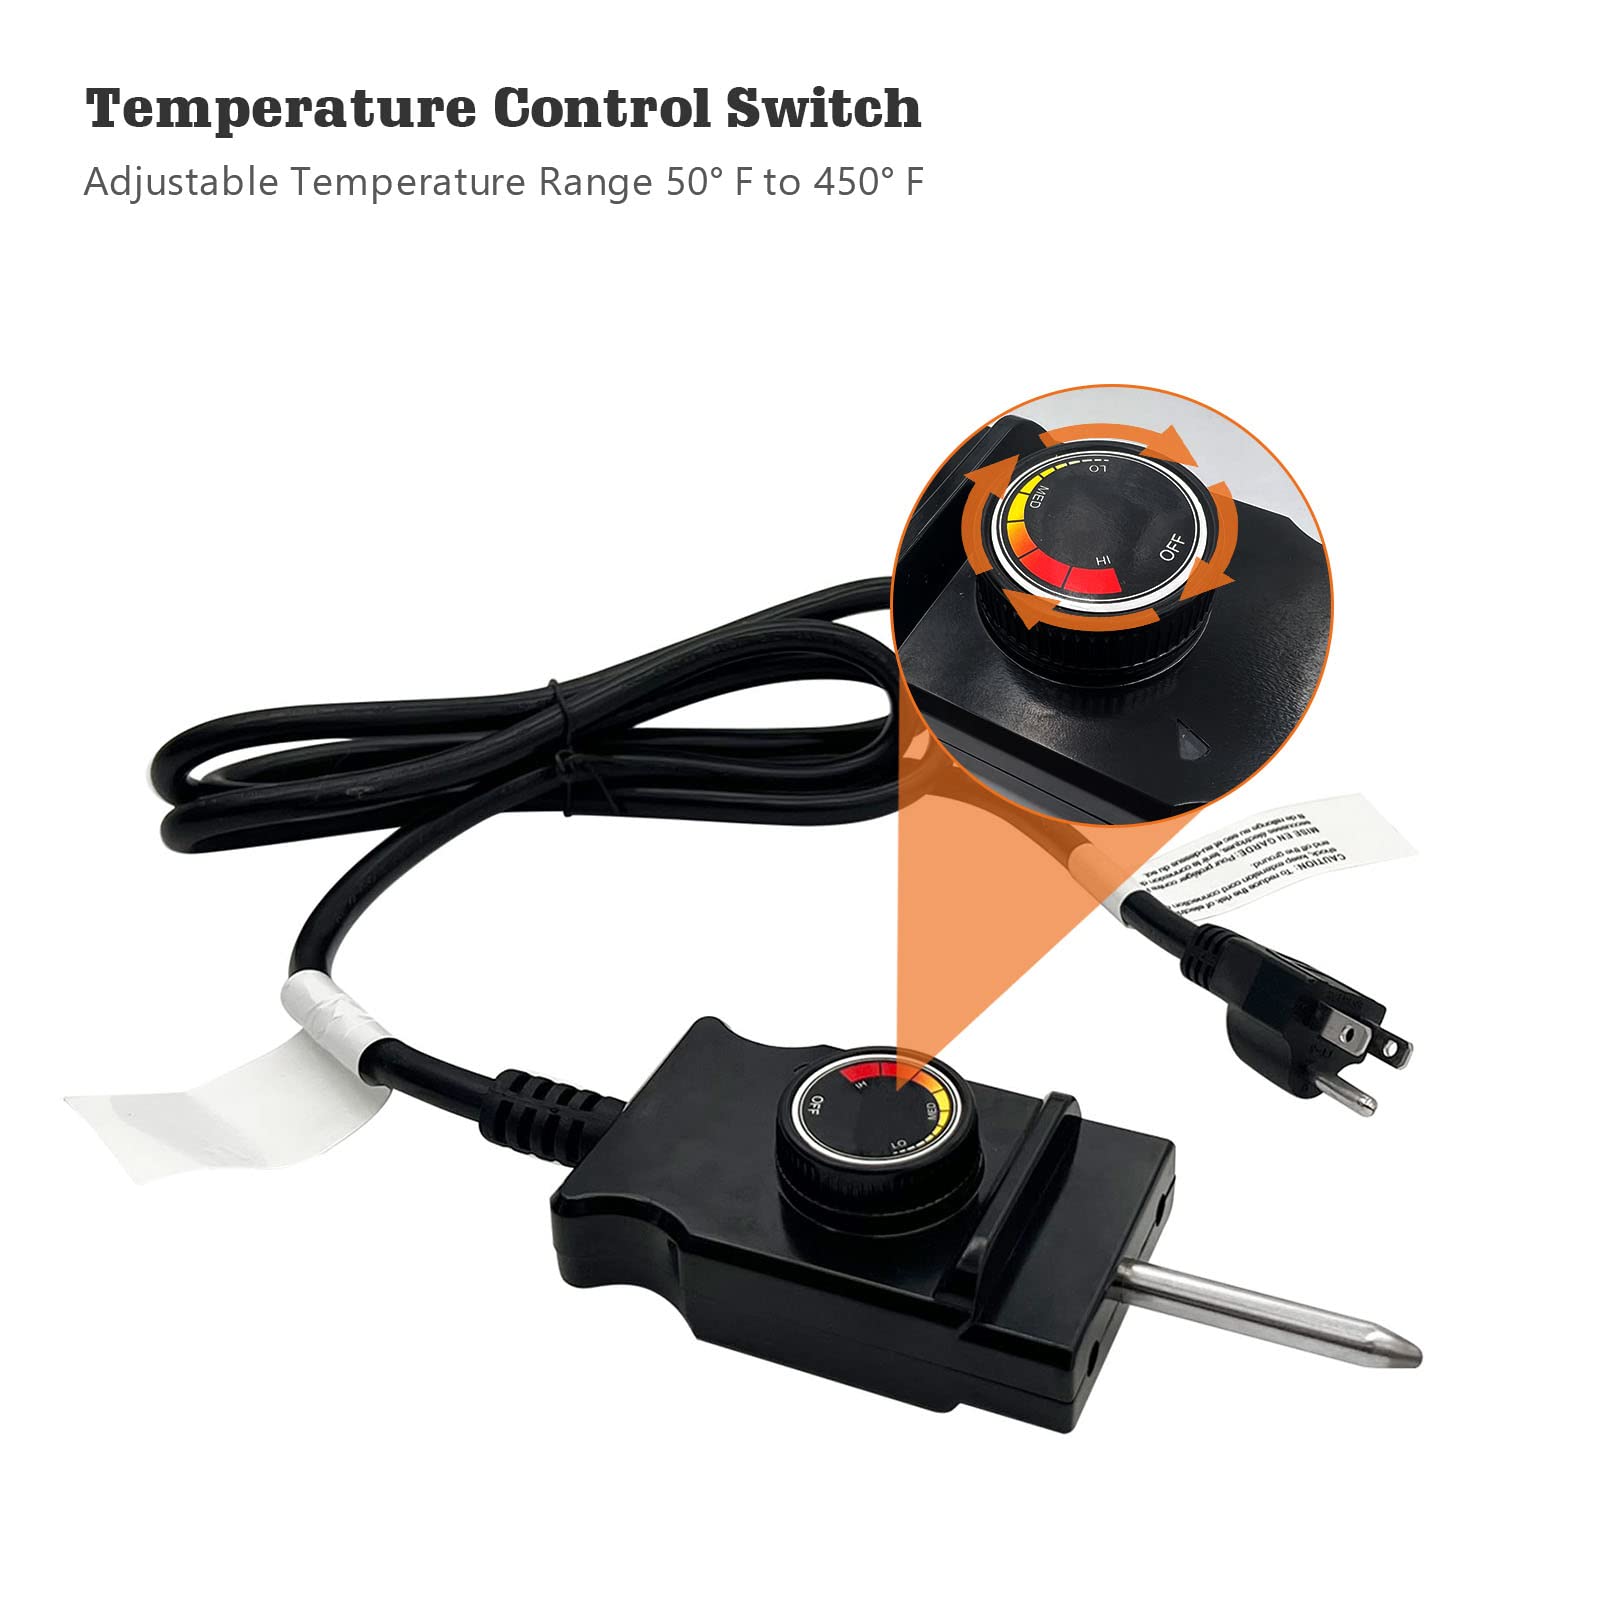 Heavy Duty 1600 Watt 3 Wire Wide Probe Thermostat Control Cord fits  Electric Smokers and Grills